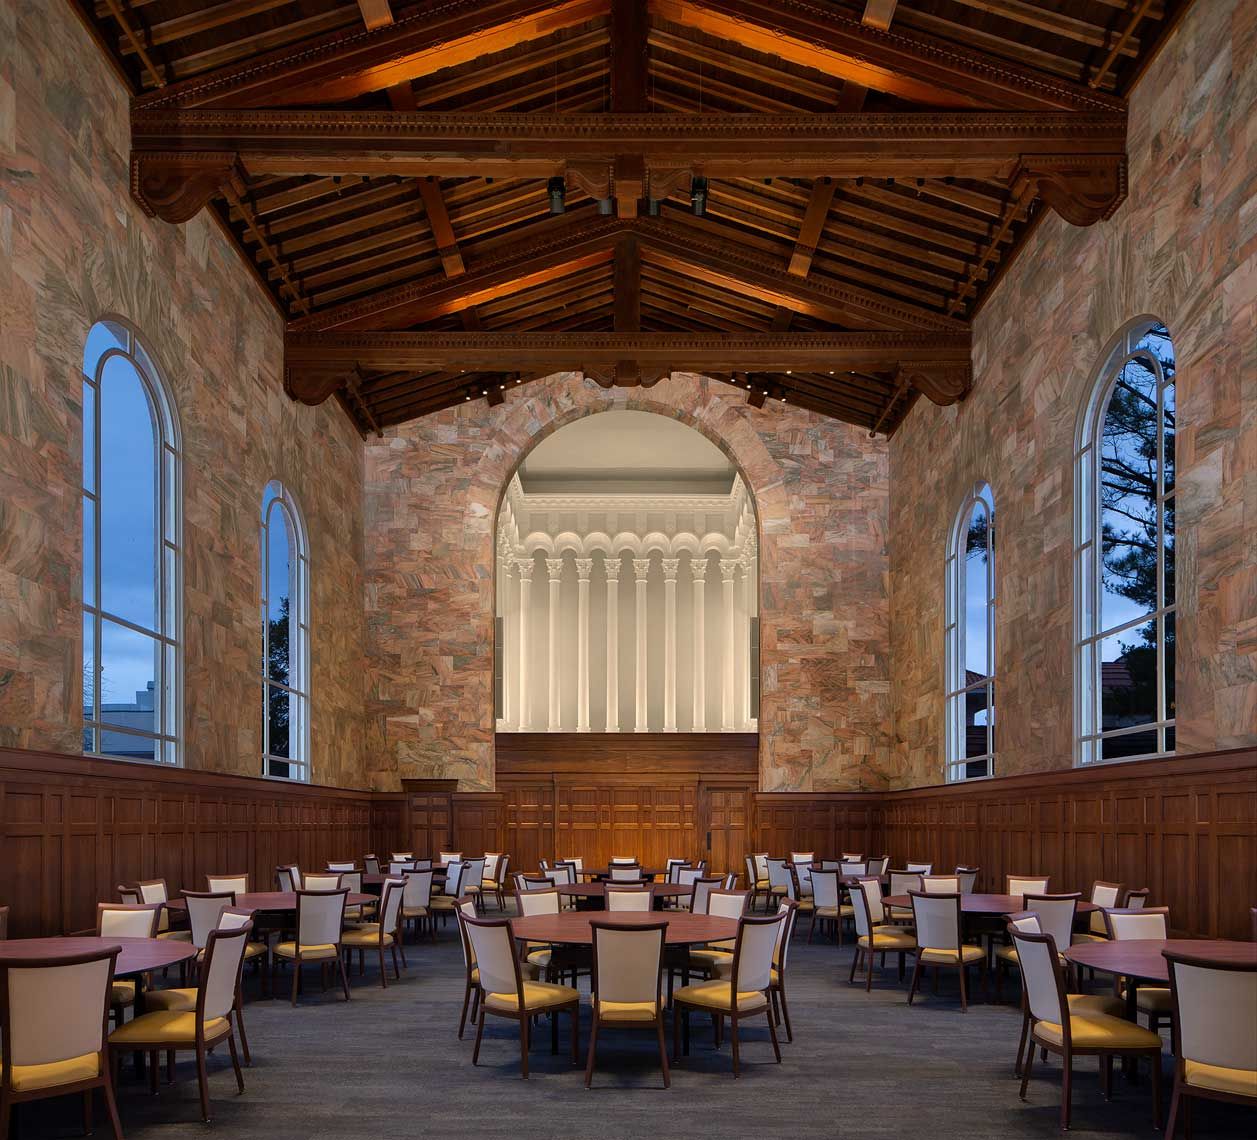 An interior view of the Convocation Hall at Emory University